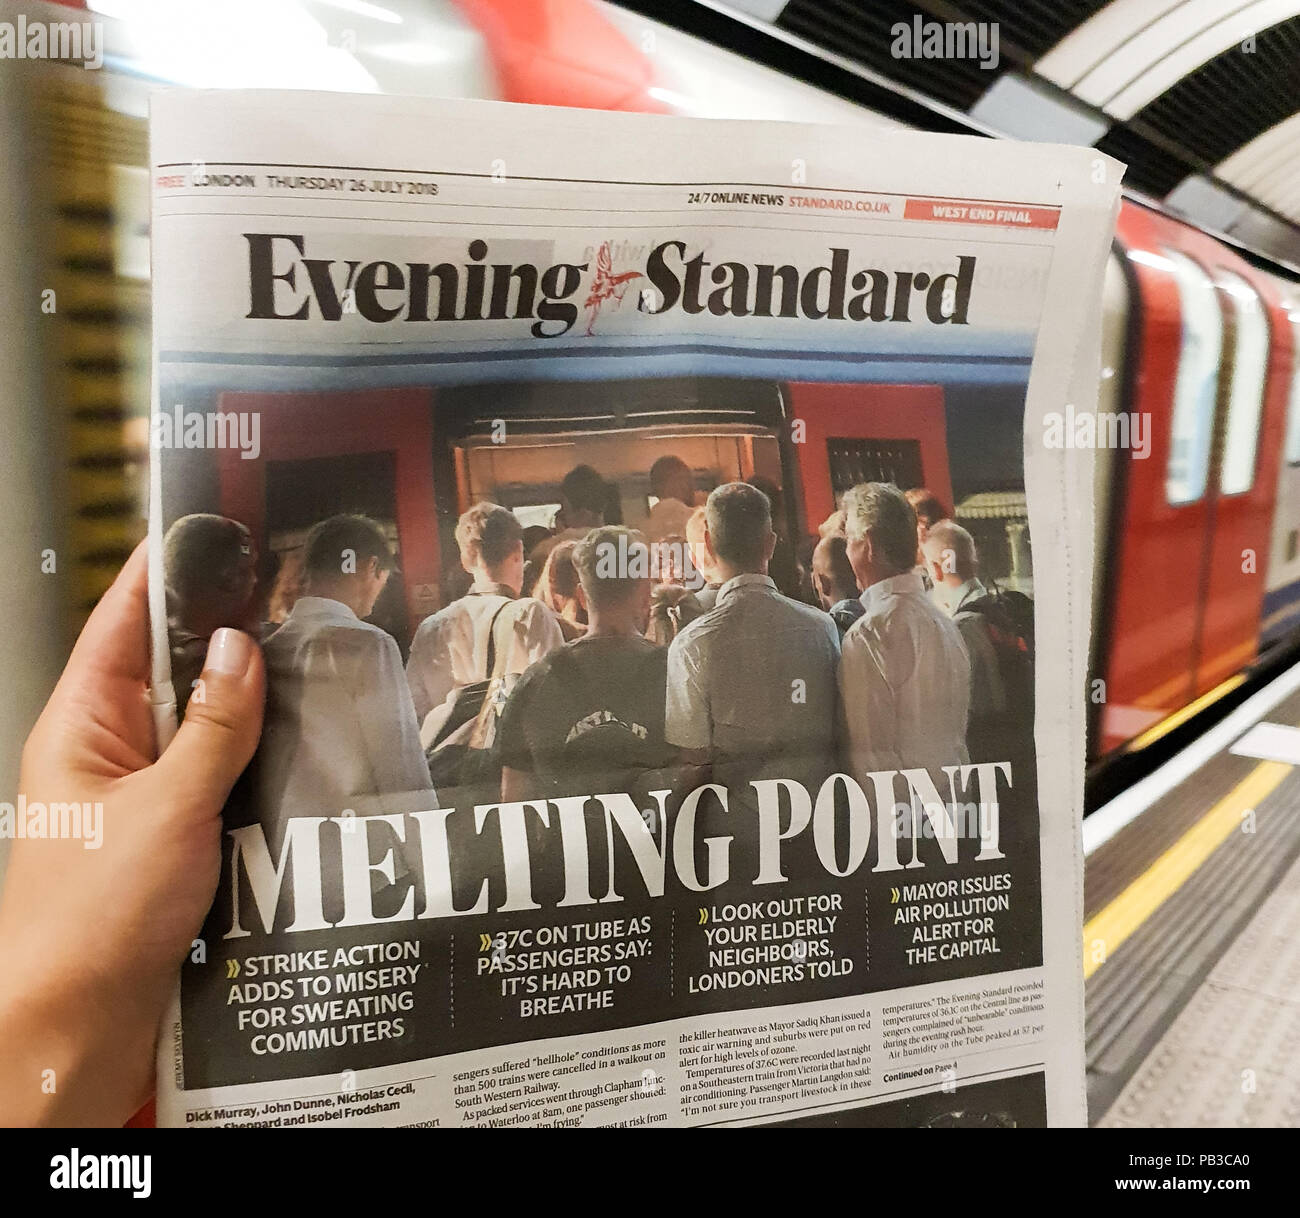 Underground platform. London. UK 26 July 2018 - A person holds the latest edition of London Evening Standard with the headline “Melting Point” on the hottest day of the year as a train approaches the station platform. Heathrow Airport saw the day's highest temperature of 35 degrees celsius. Temperature reached over 35 degrees celsius on the underground trains and commuters have complained of unbearable travel conditions.  Credit: Dinendra Haria/Alamy Live News Stock Photo